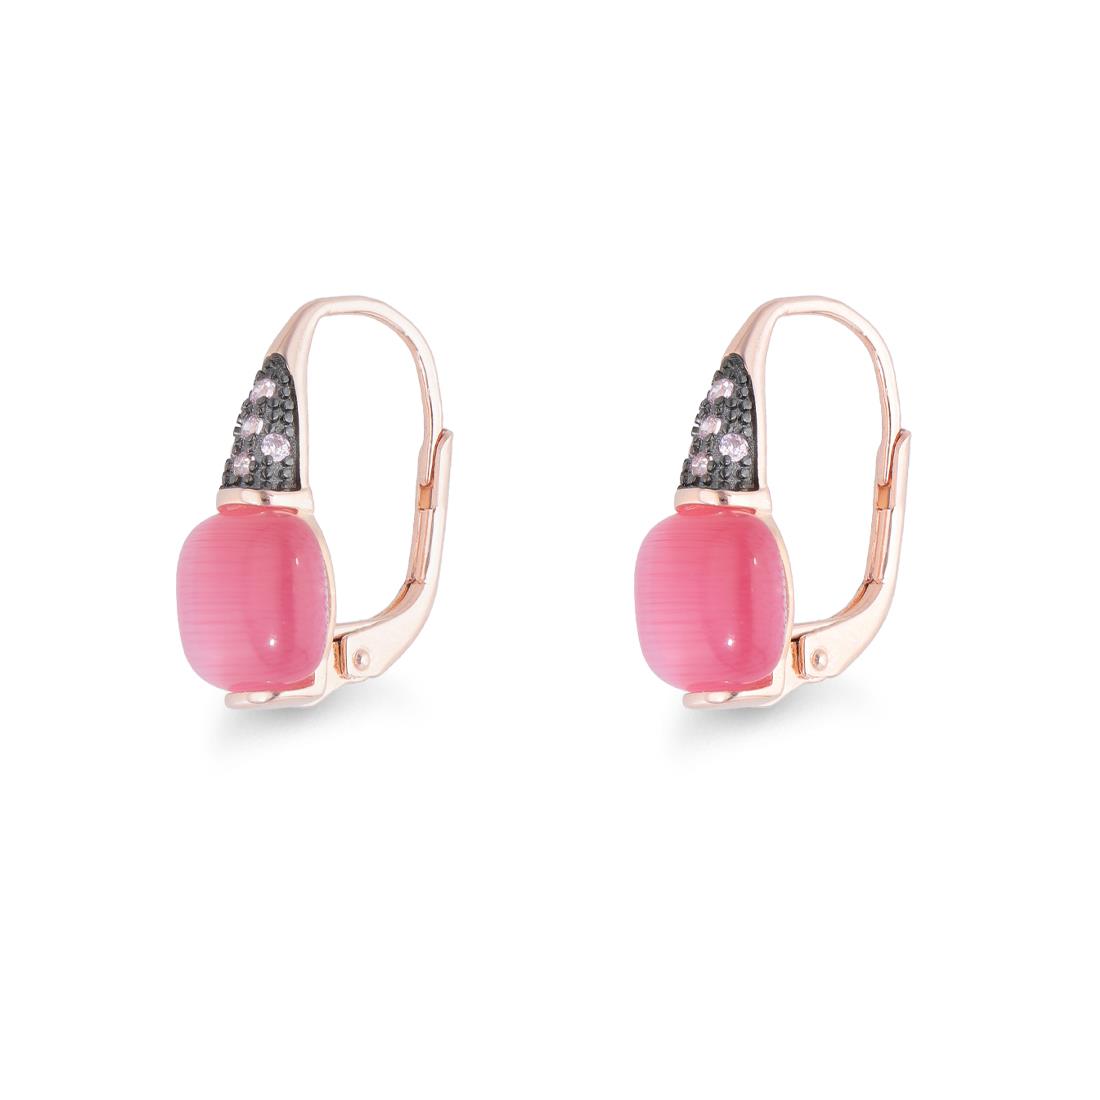 Lean earrings in pink silver with pink stone and zircons - ORO&CO 925